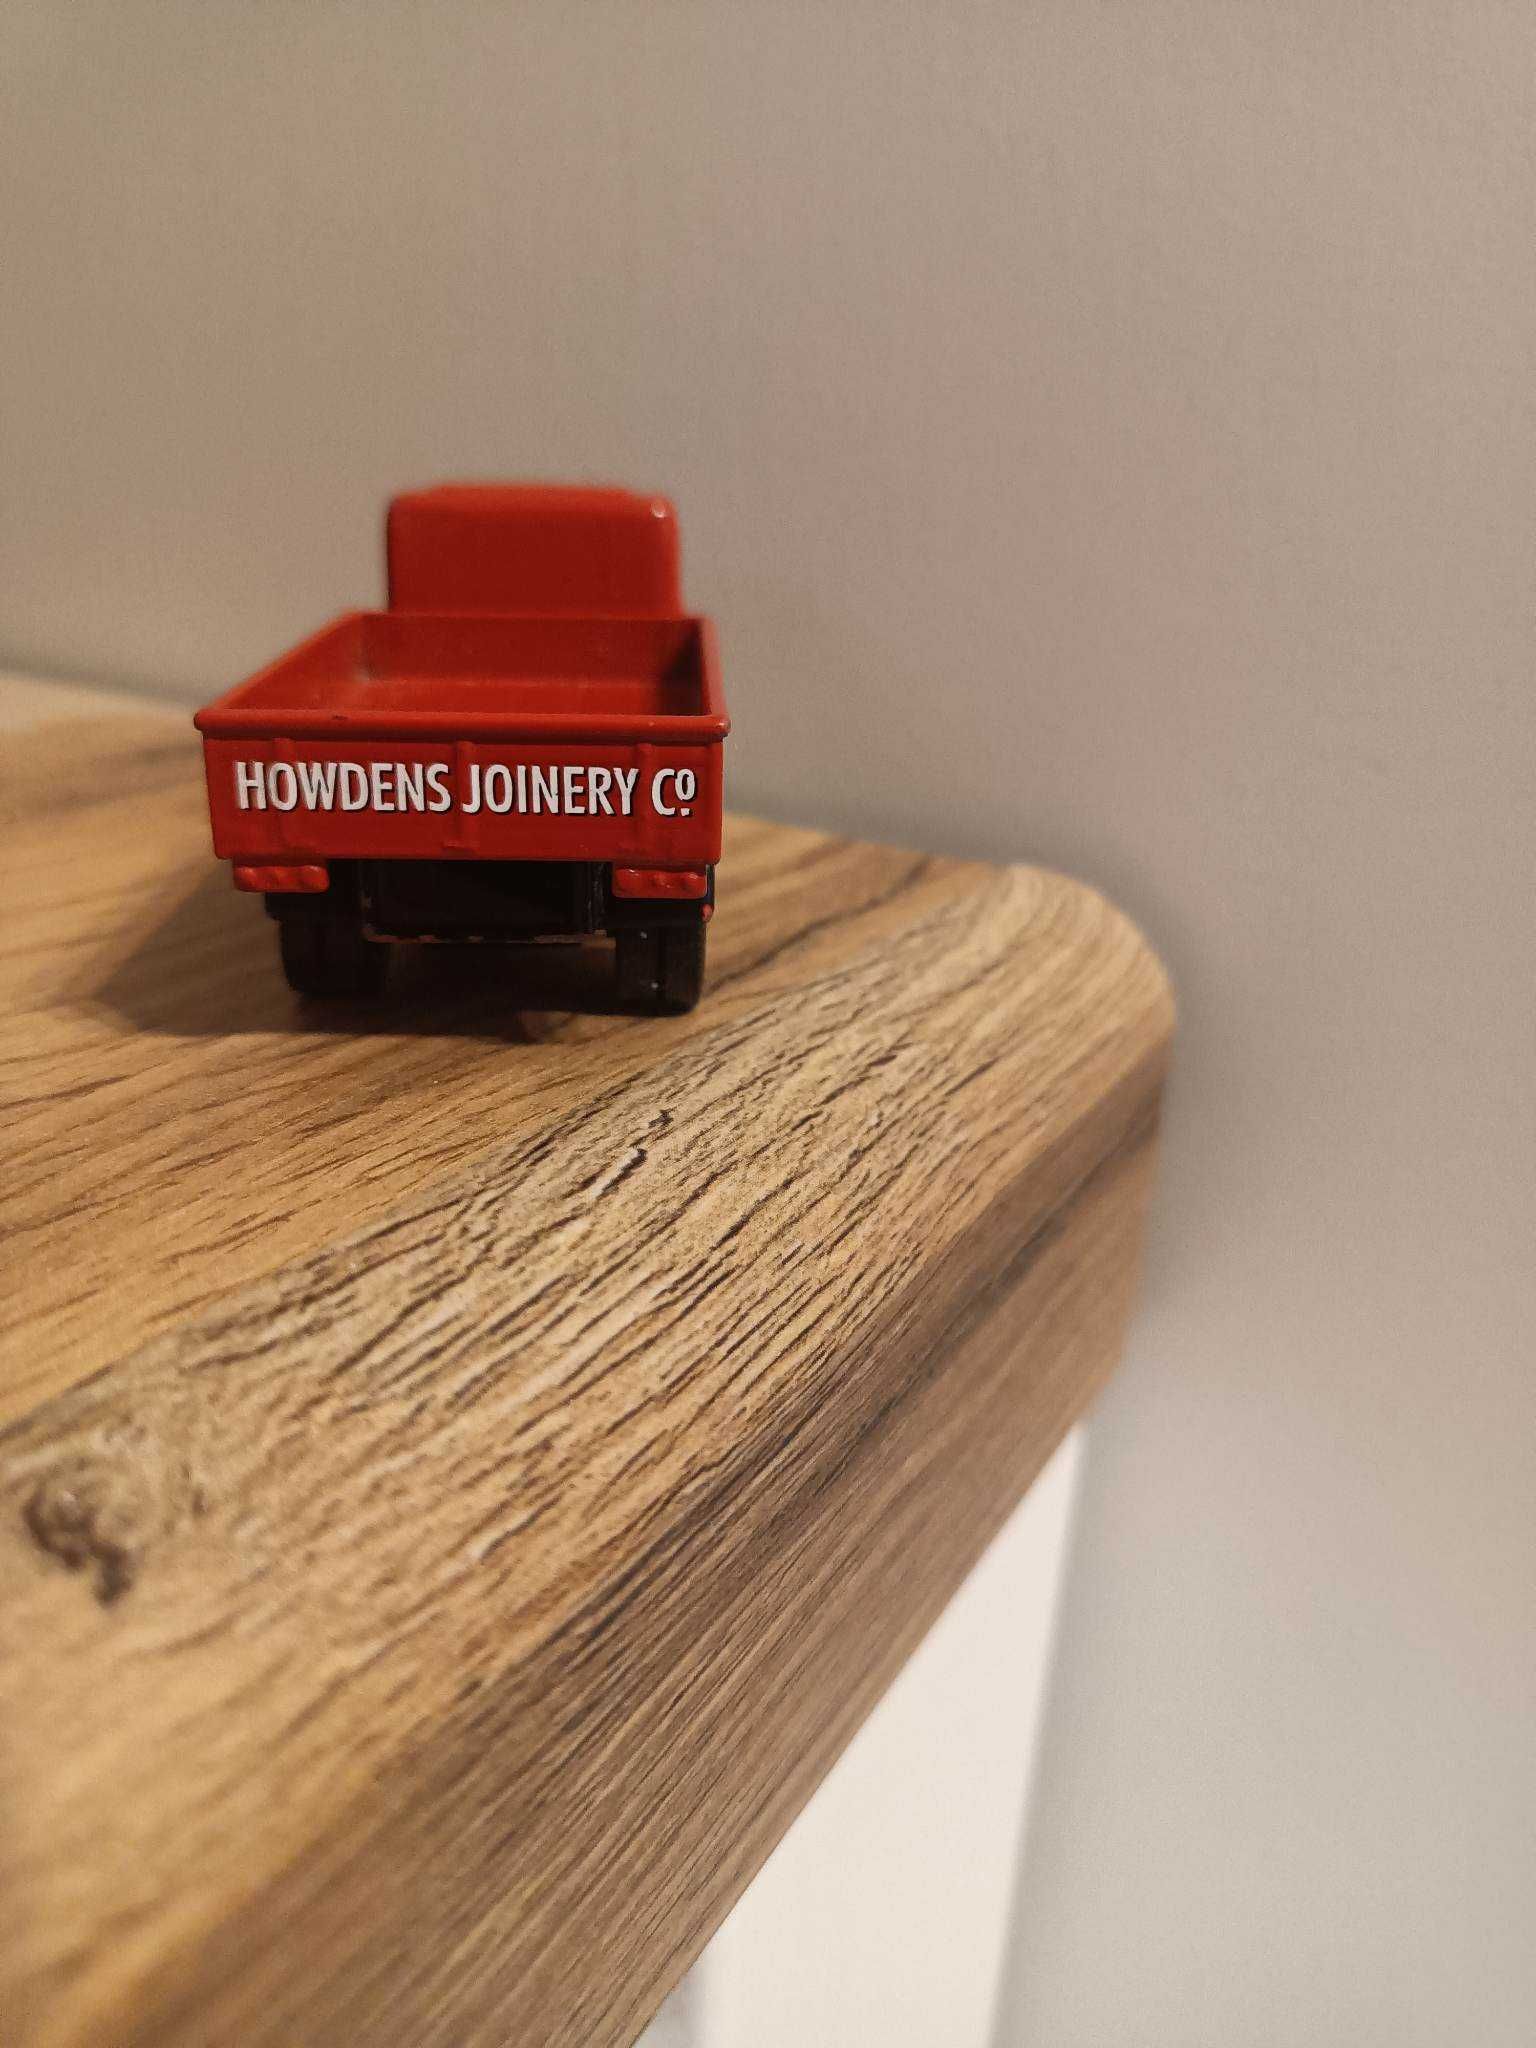 Corgi Howdens Joinery Truck - Special Edition Diecast Red Model